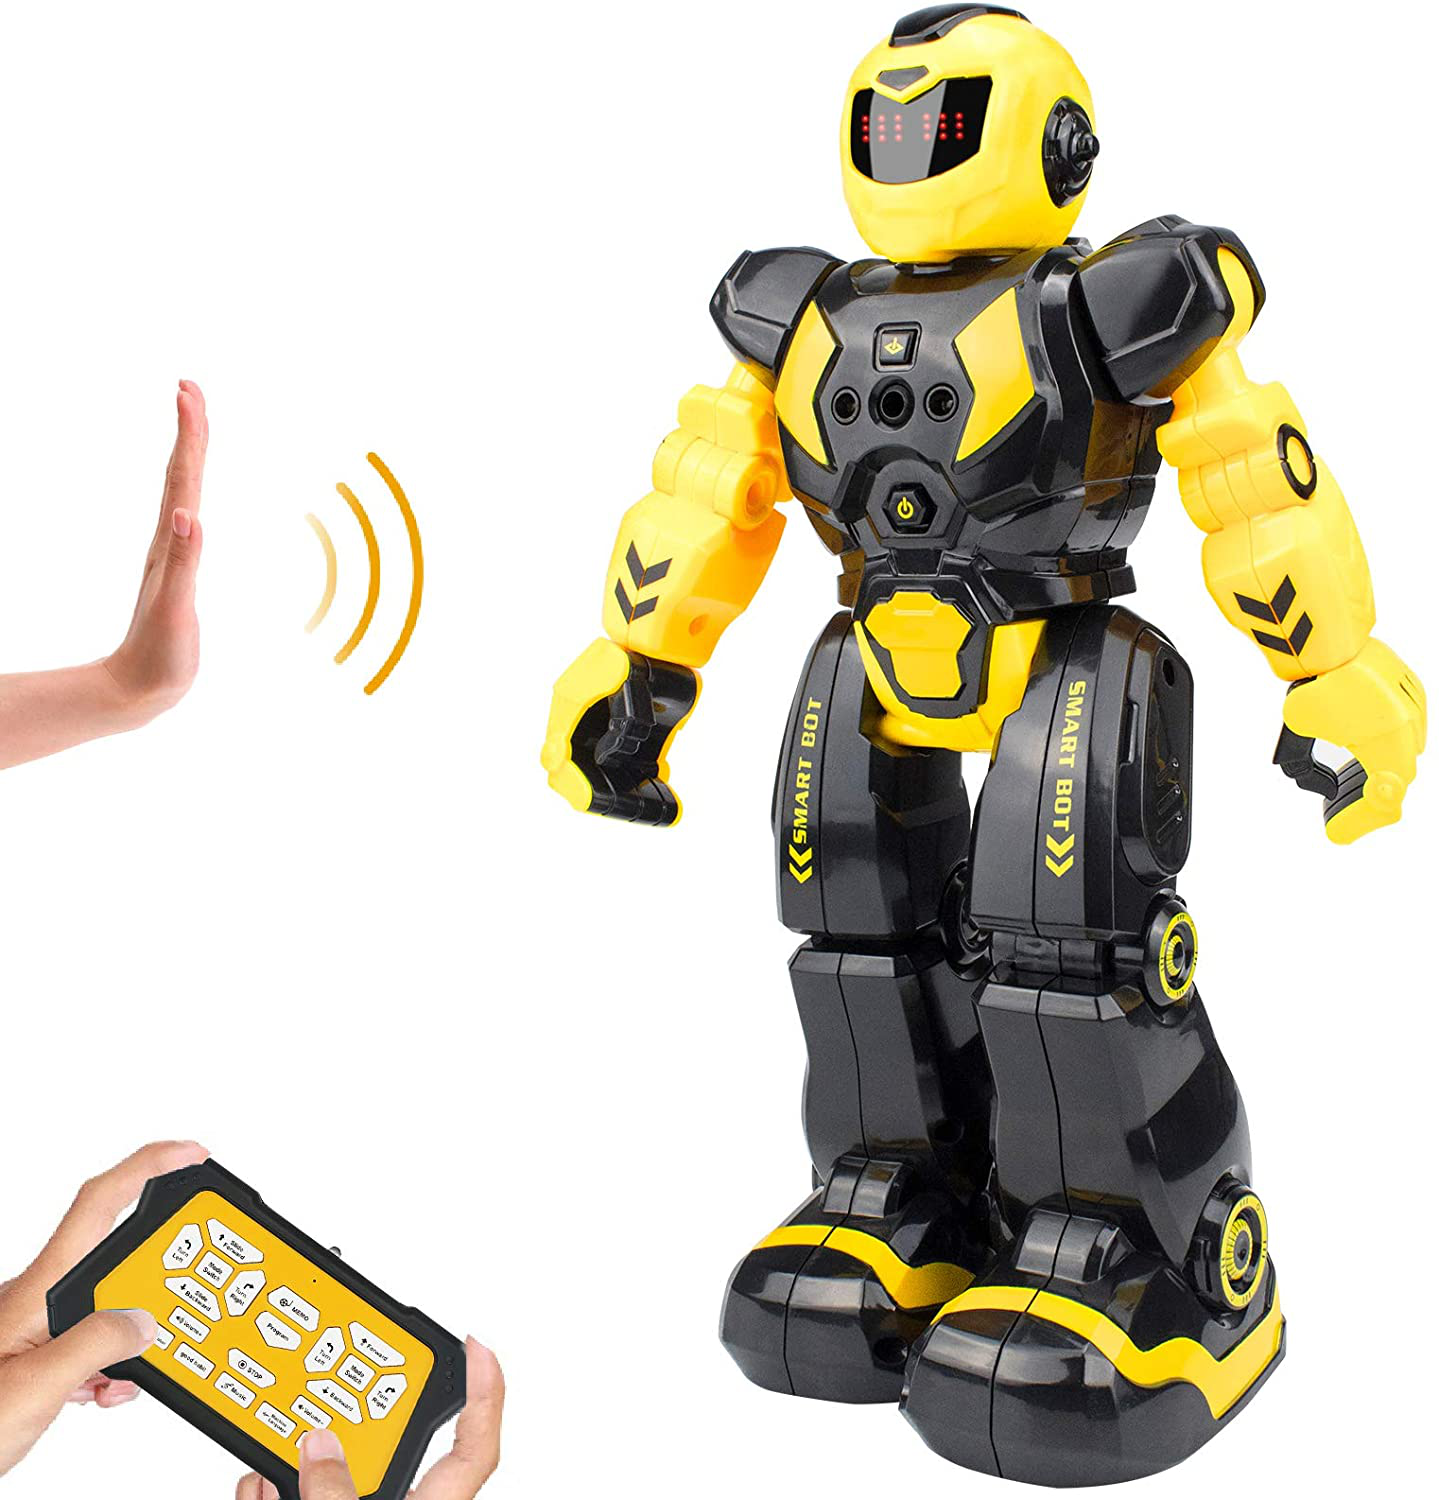 Remote Control Robot for Kids, Sikaye Intelligent Programmable Robot with Infrared Controller Toys,Dancing,Singing, Moonwalking and LED Eyes, Gesture Sensing Robot Kit for Childrens (Yellow)